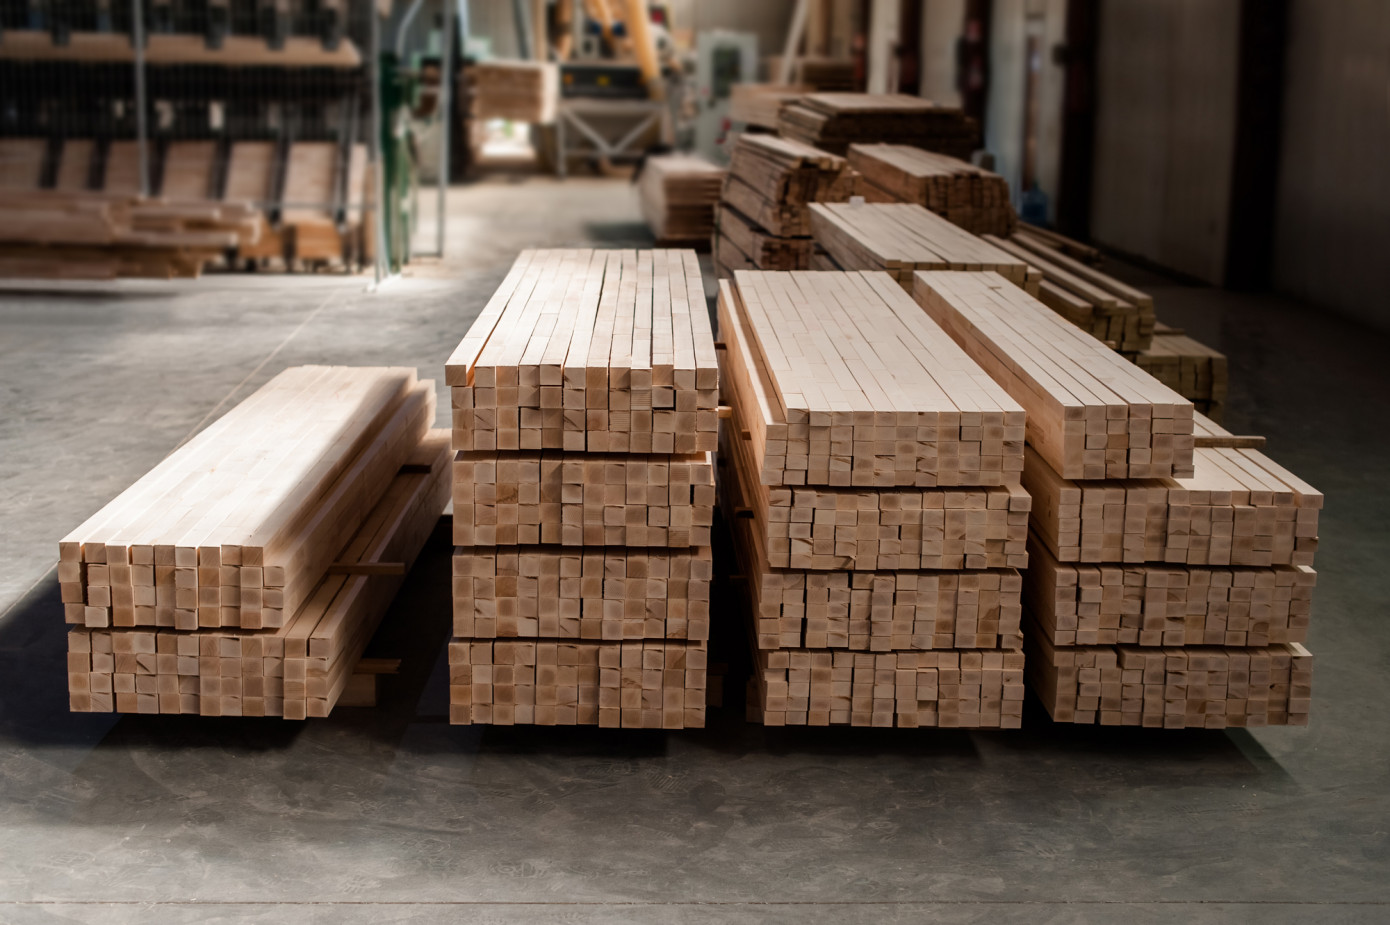 In 2021, UK imports of lumber decline 21% as price jumps 142%